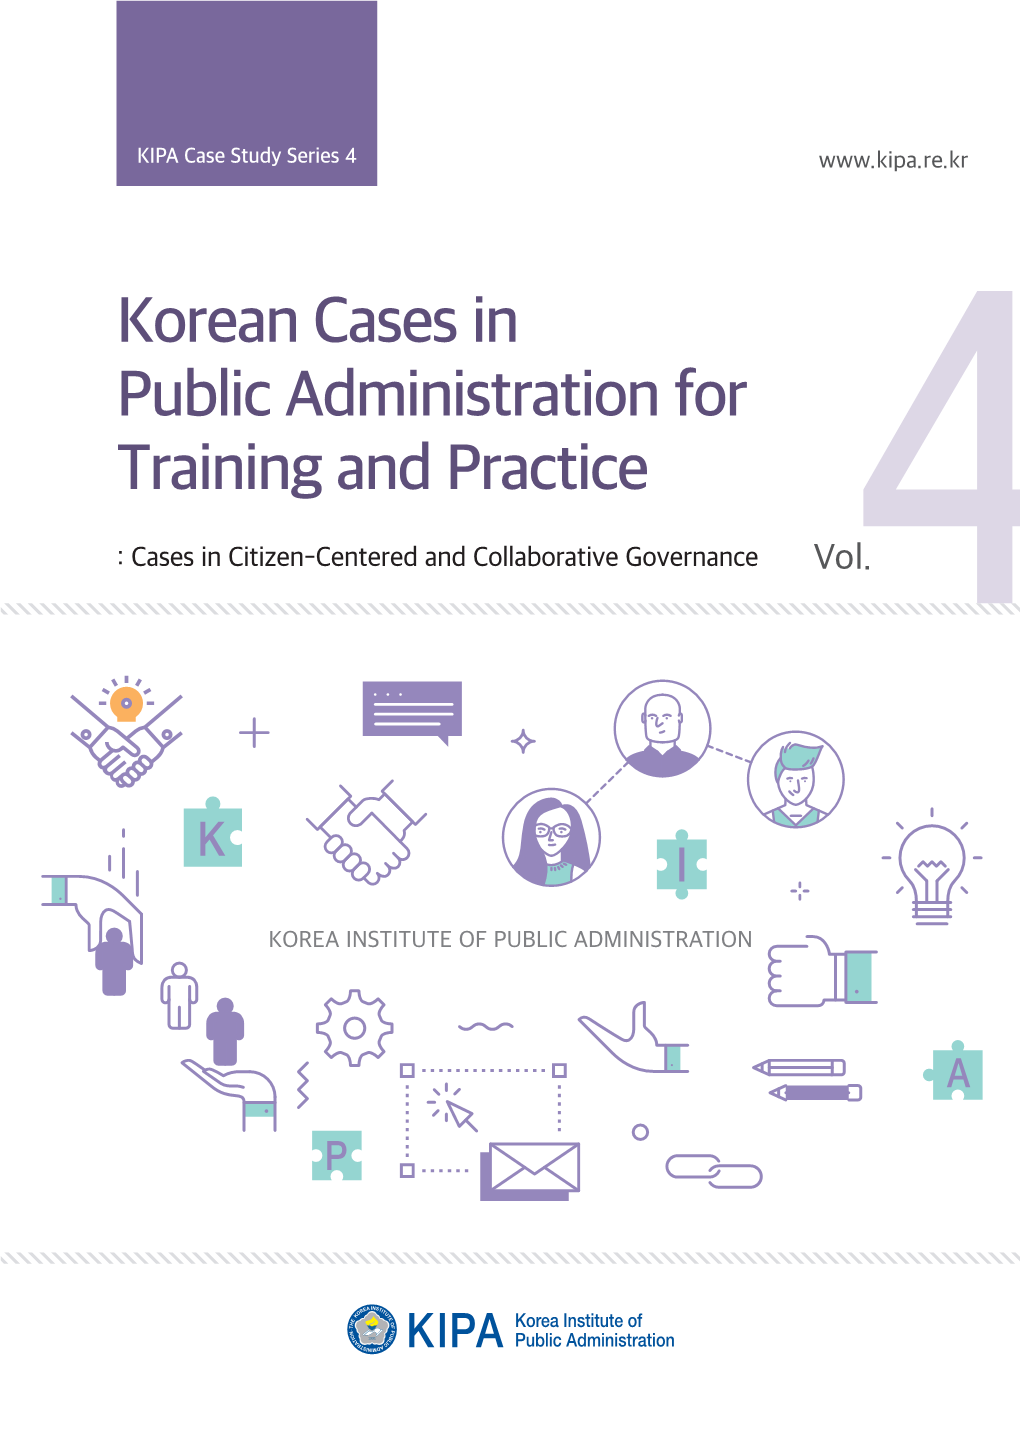 Korean Cases in Public Administration for Training and Practice